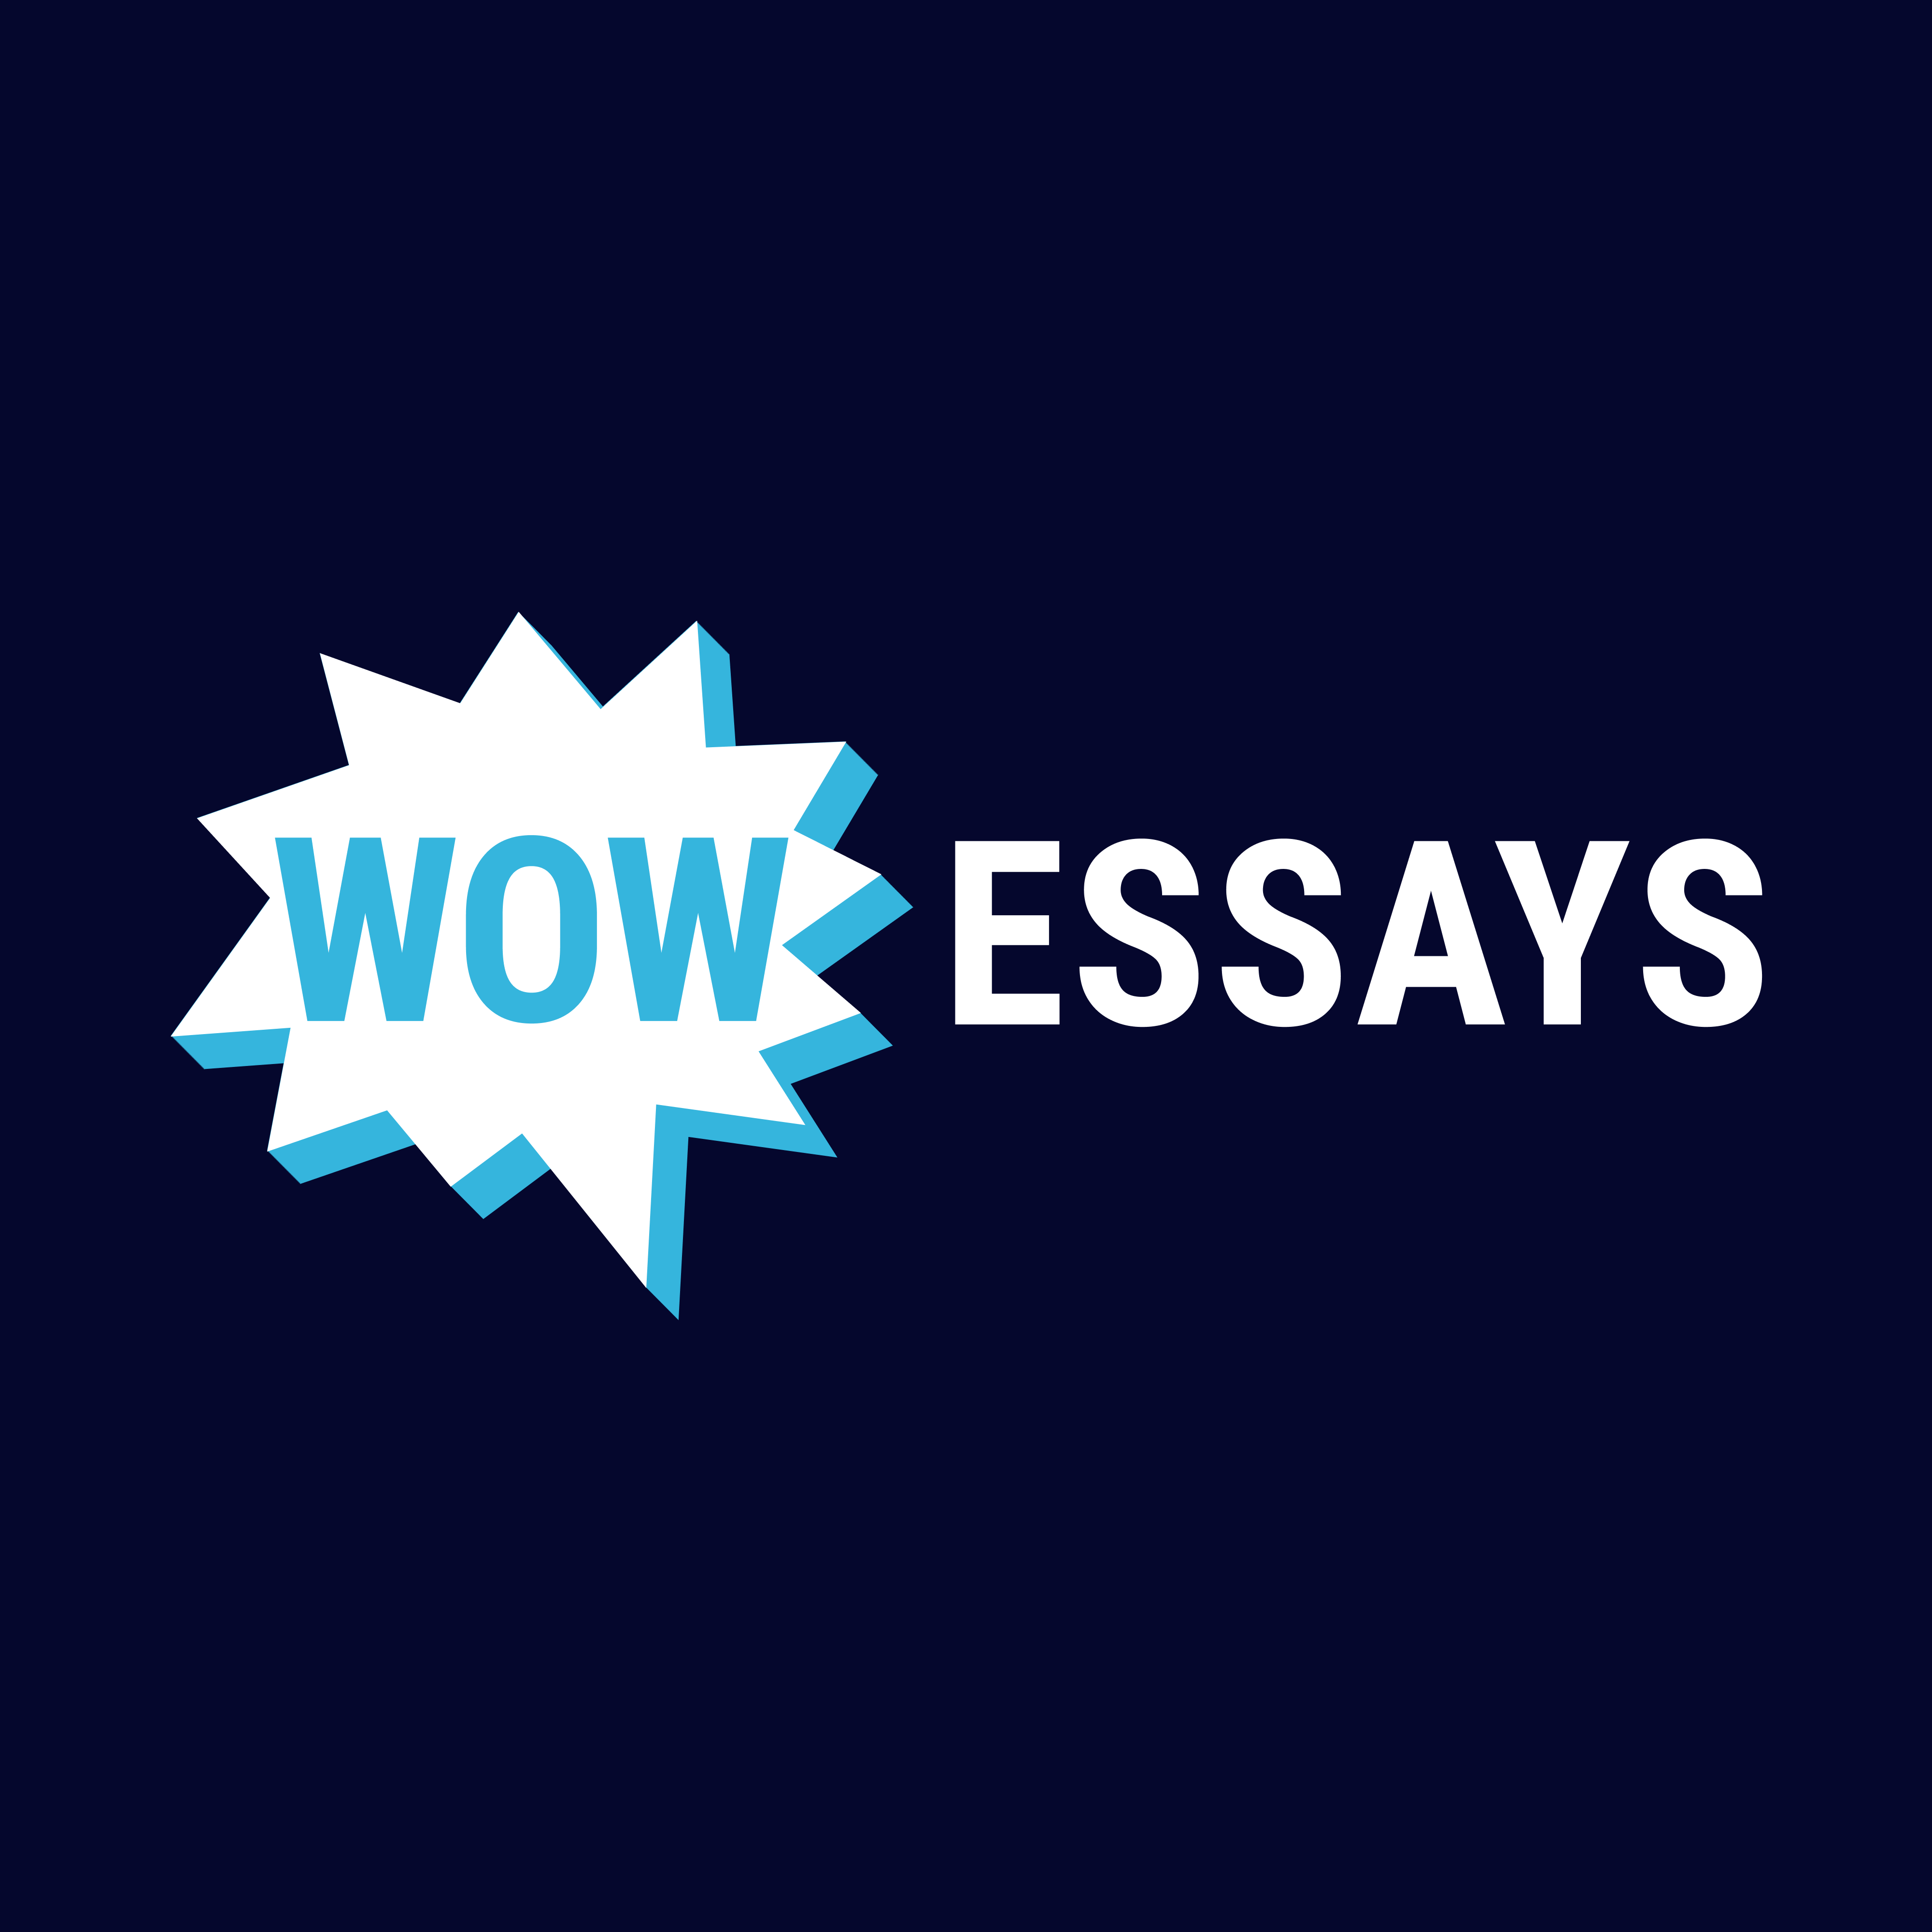 type an essay online for free